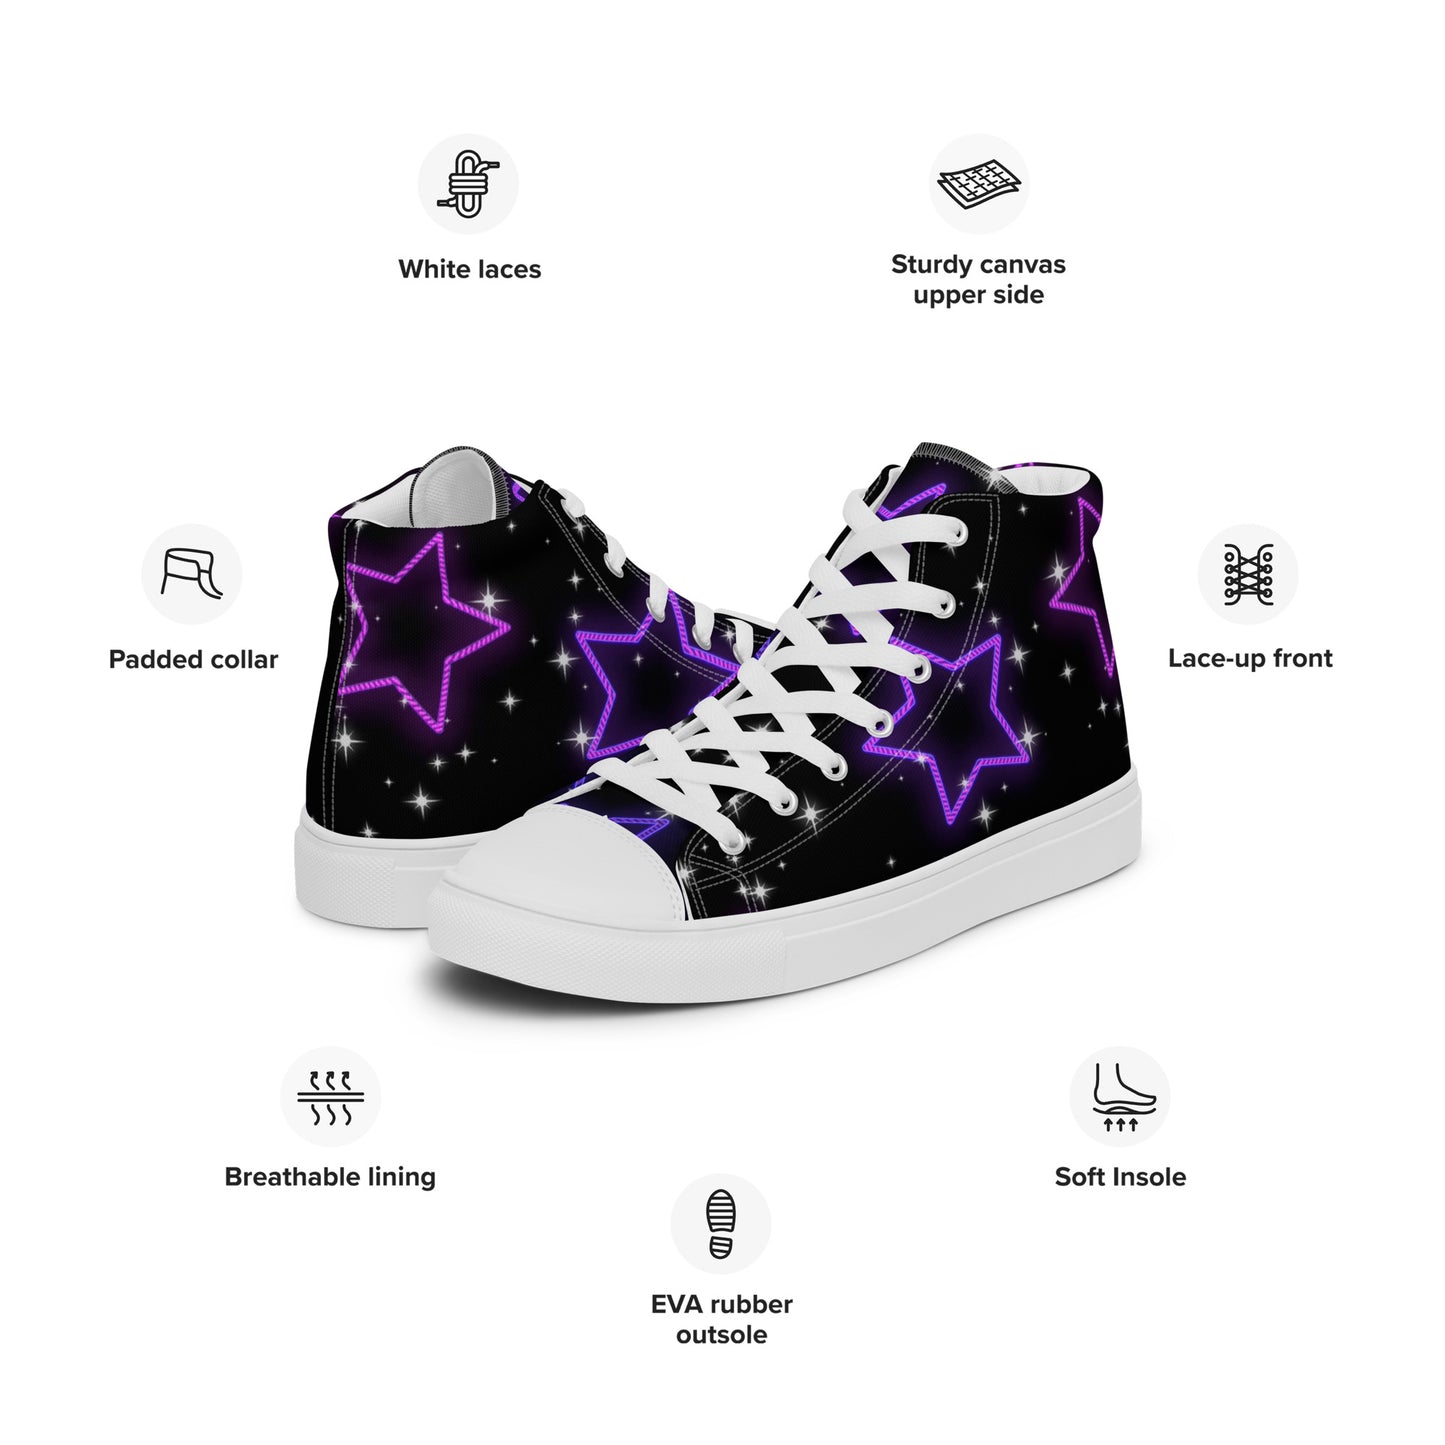 Neon Star Women’s High Top Canvas Shoes